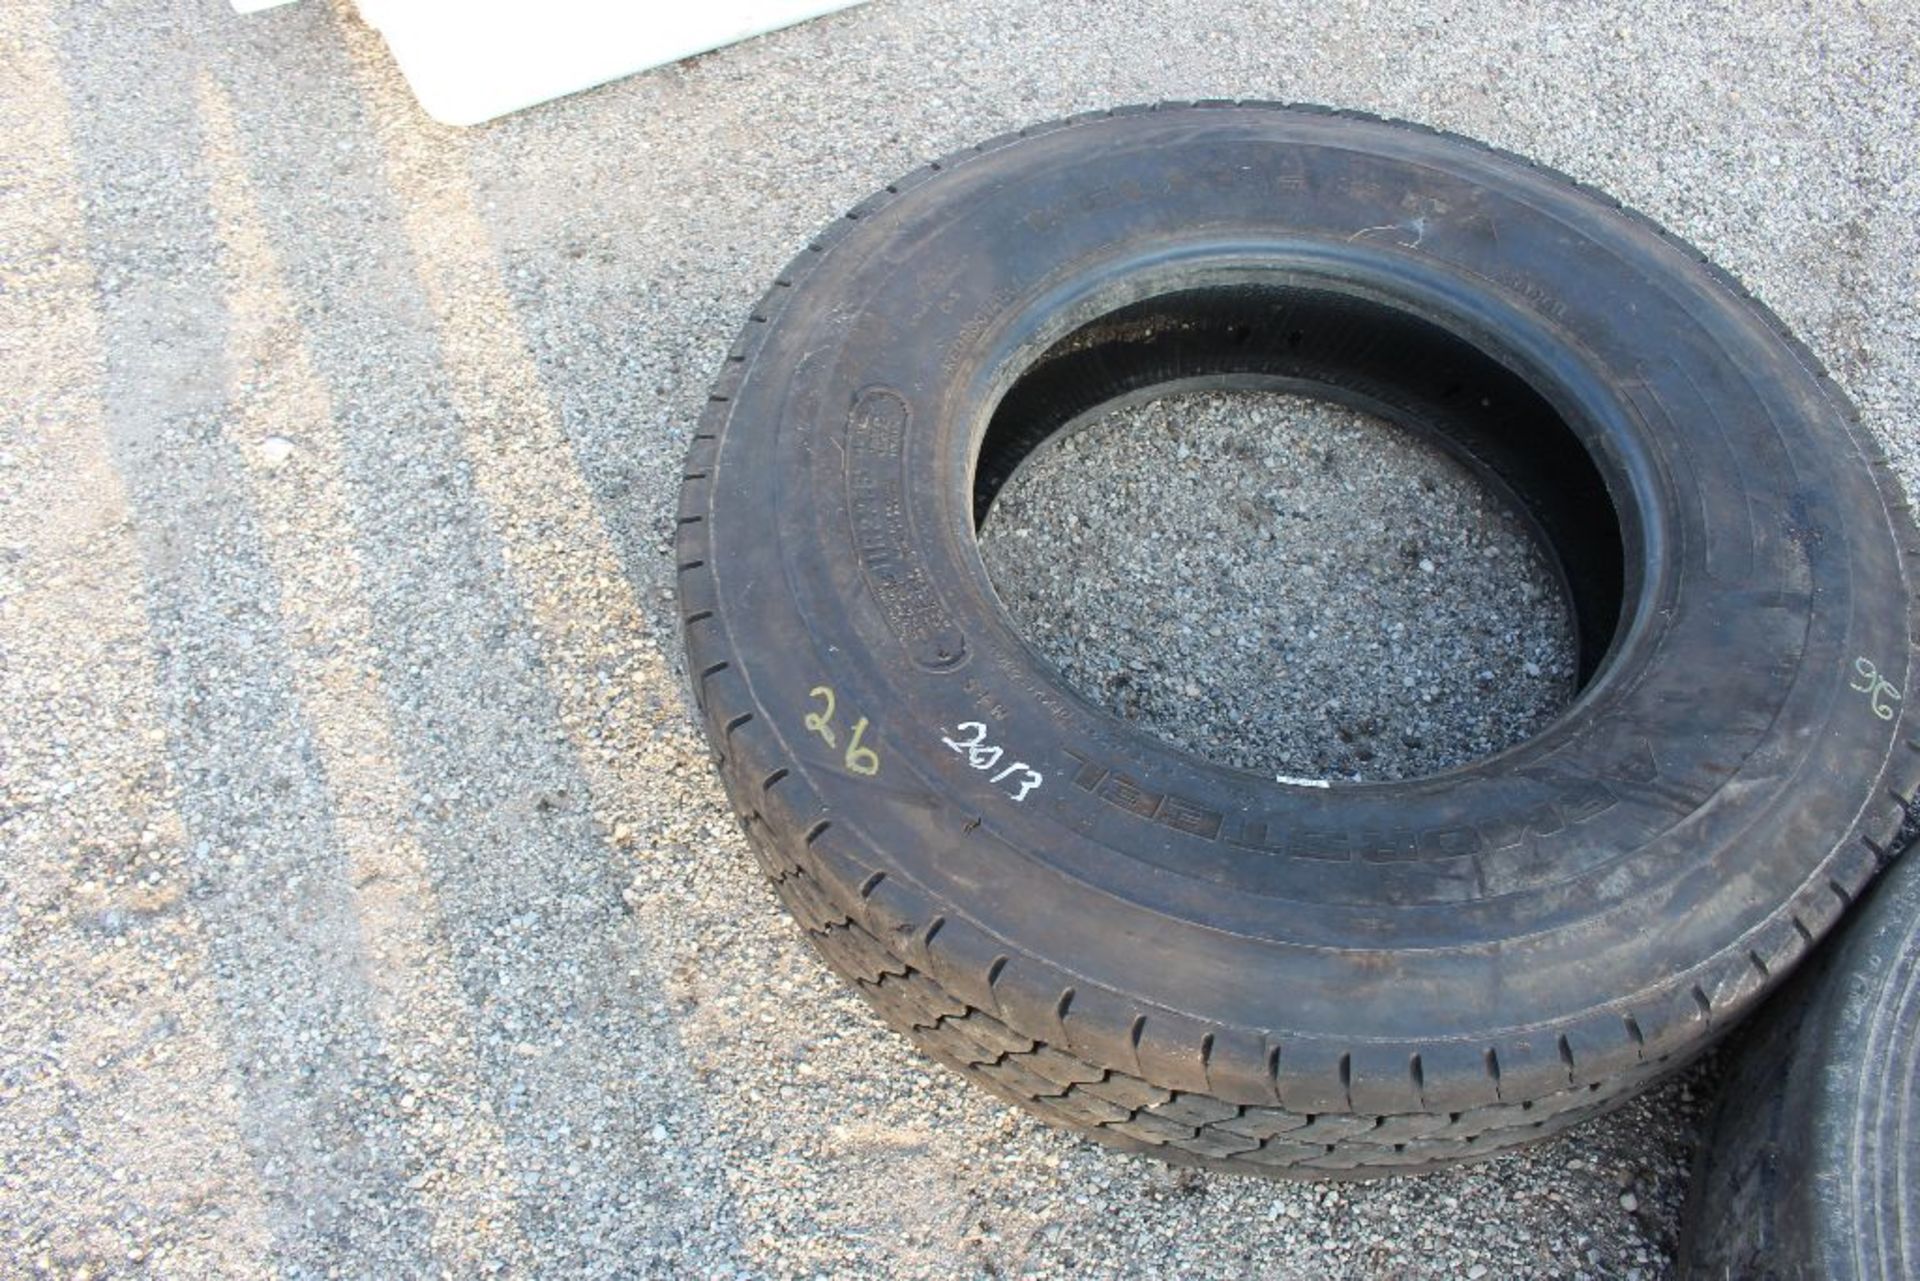 Kelly 11R22.5 tractor tire.